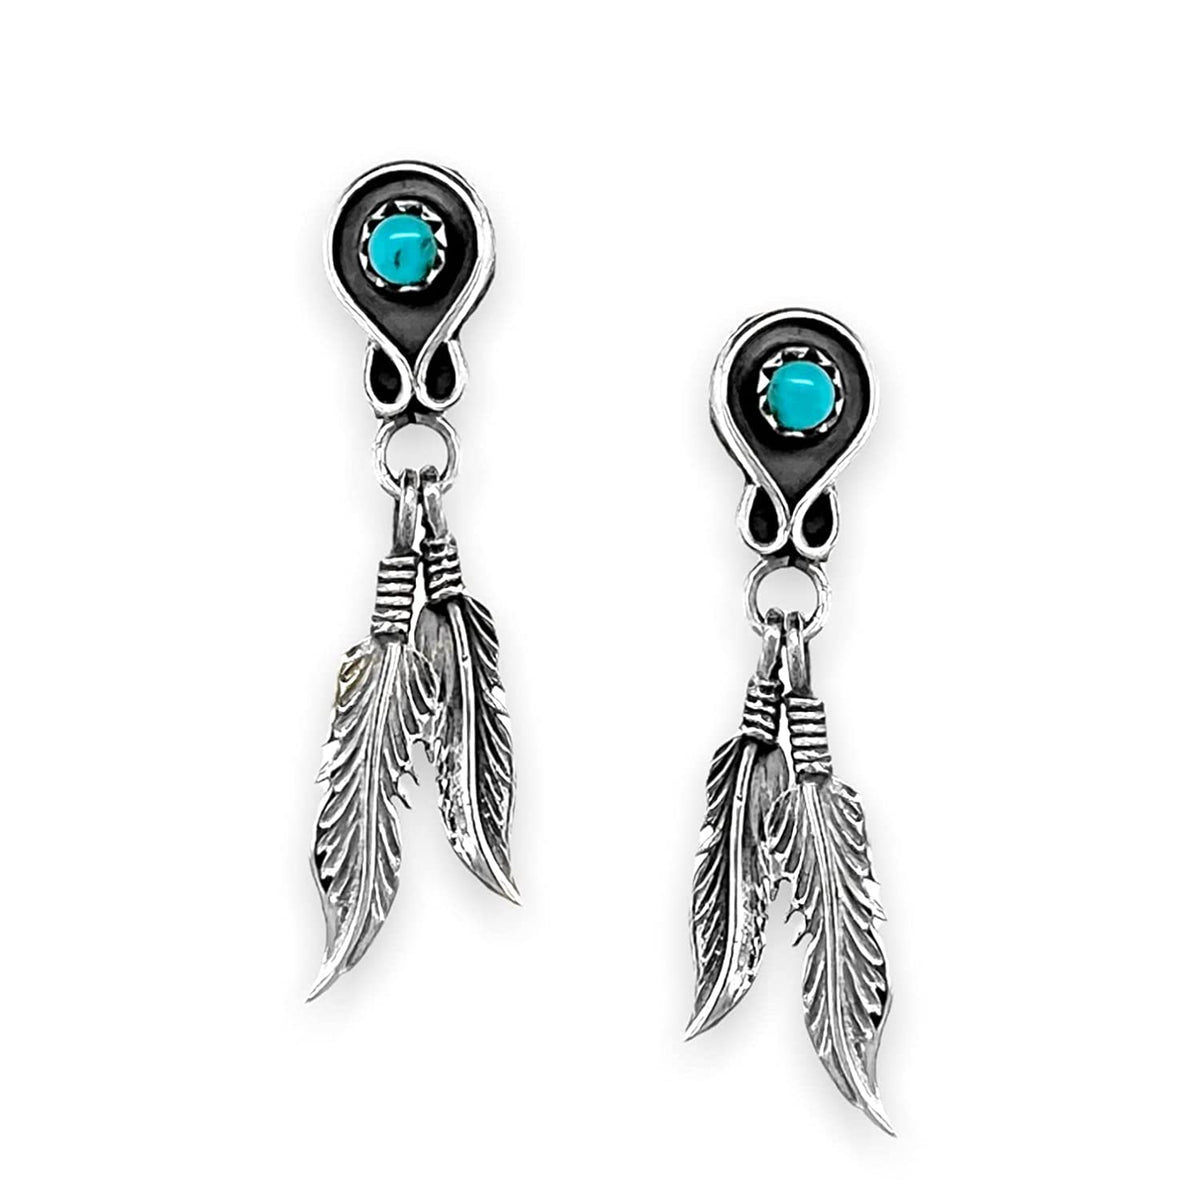 Genuine Sleeping Beauty Turquoise Feather Earrings, 925 Sterling Silver, Native American USA Handmade, Nickel Free, Post Style